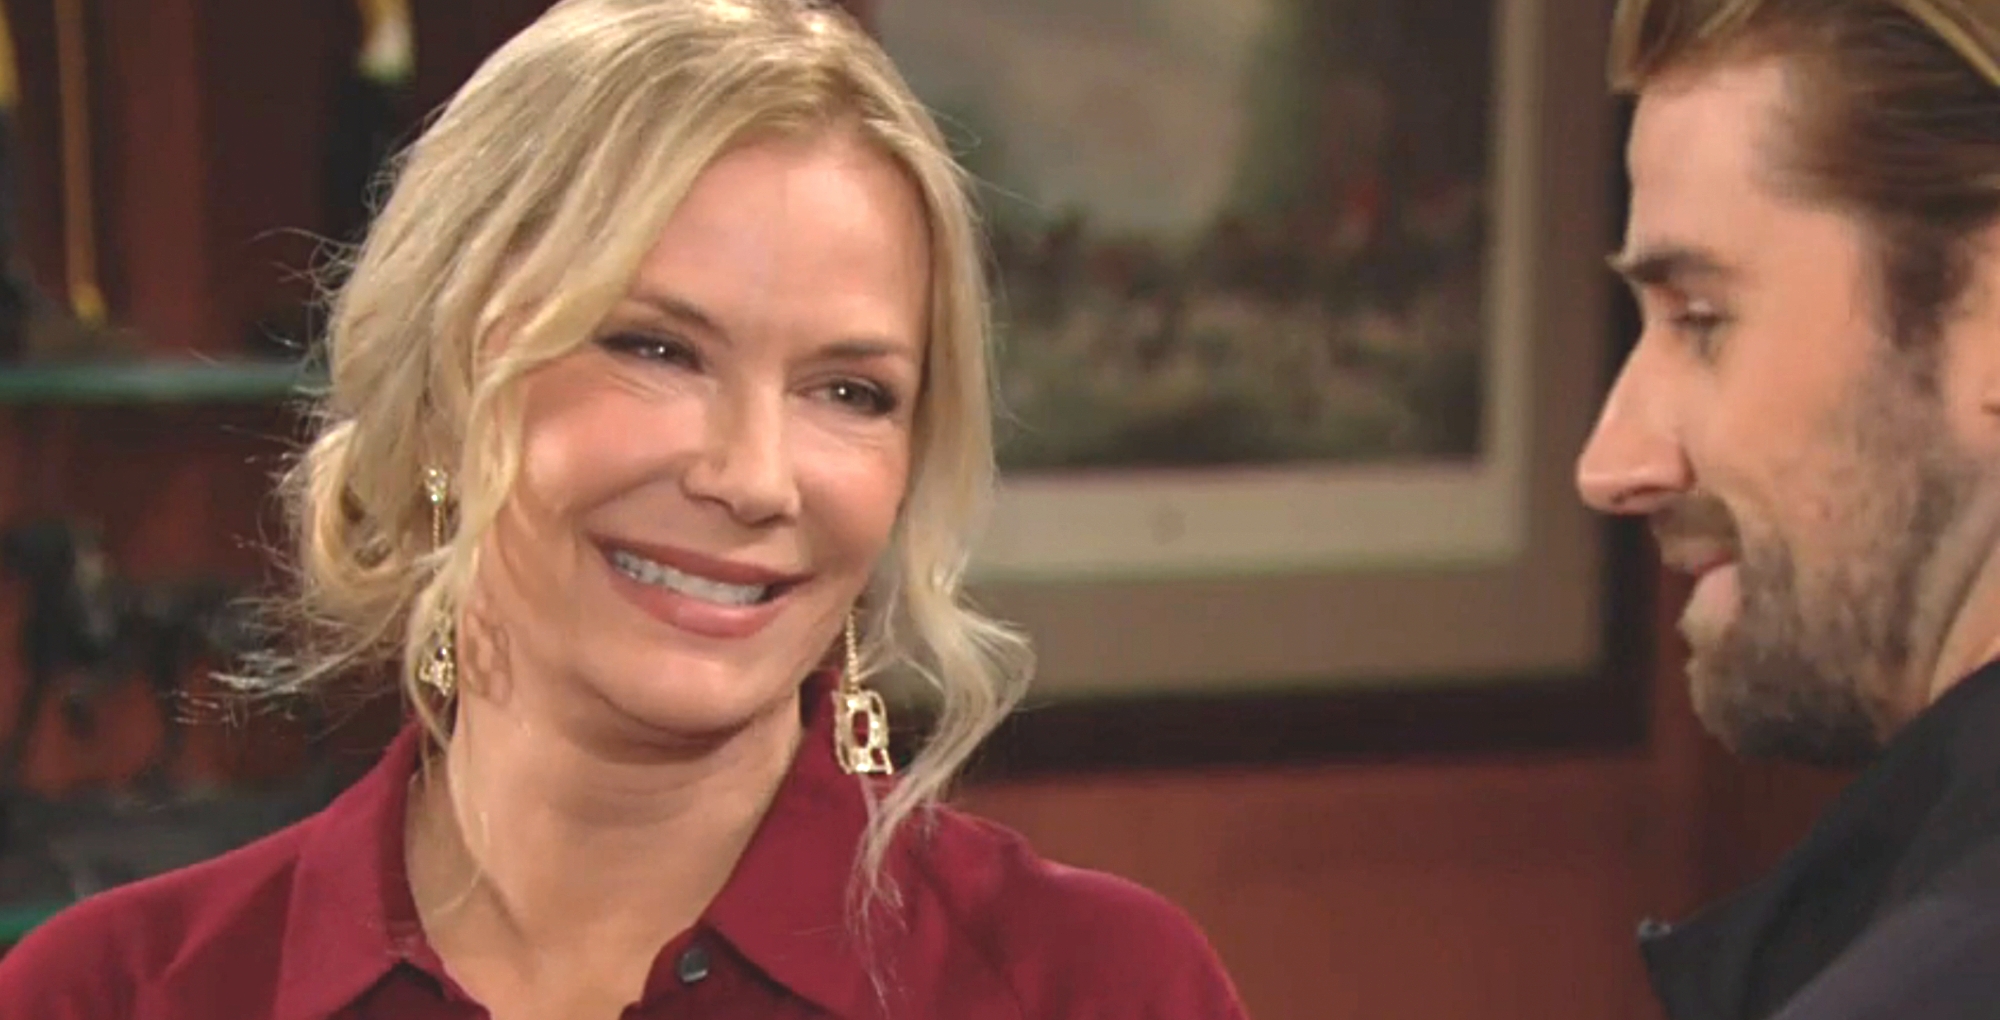 the bold and the beautiful recap for wednesday, february 22, 2023 brooke logan and hollis flirt uproariously